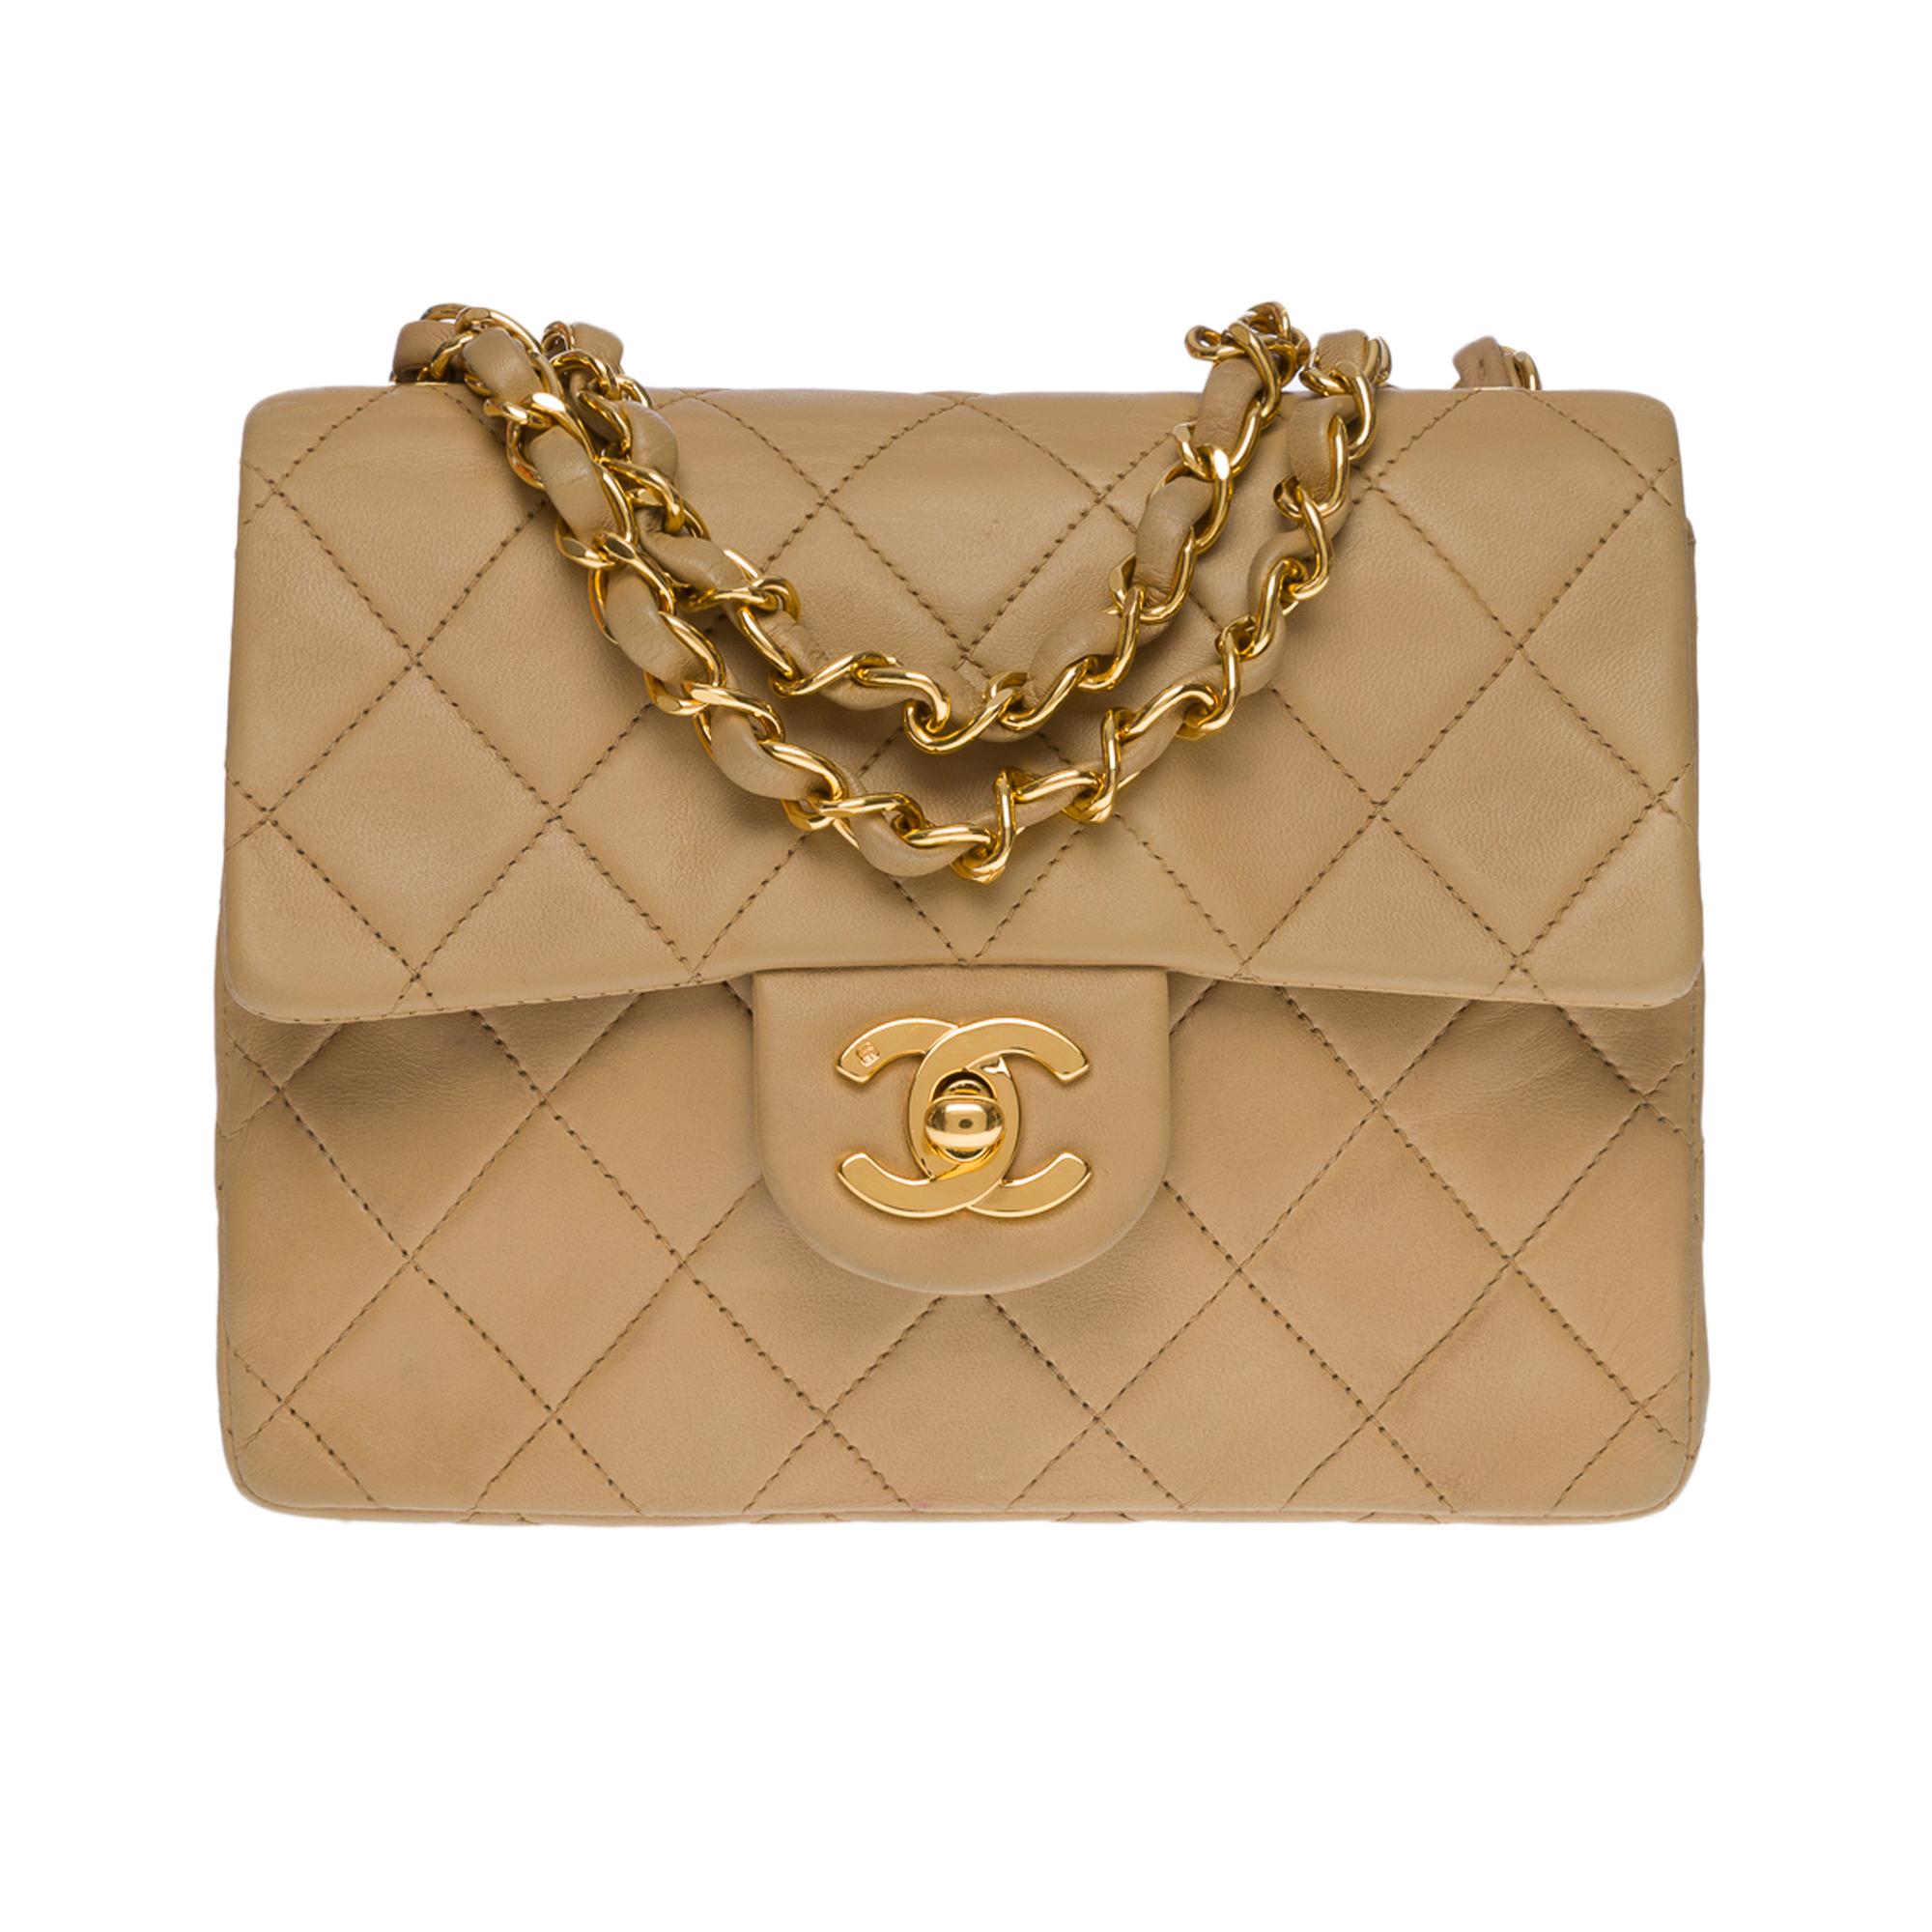 Exquisite Chanel Timeless Mini Flap bag in beige quilted lambskin, gold-tone metal hardware, gold-tone metal chain handle interwoven with beige leather for a shoulder and shoulder strap

Backpack pocket
Flap closure, gold-tone CC clasp
Single